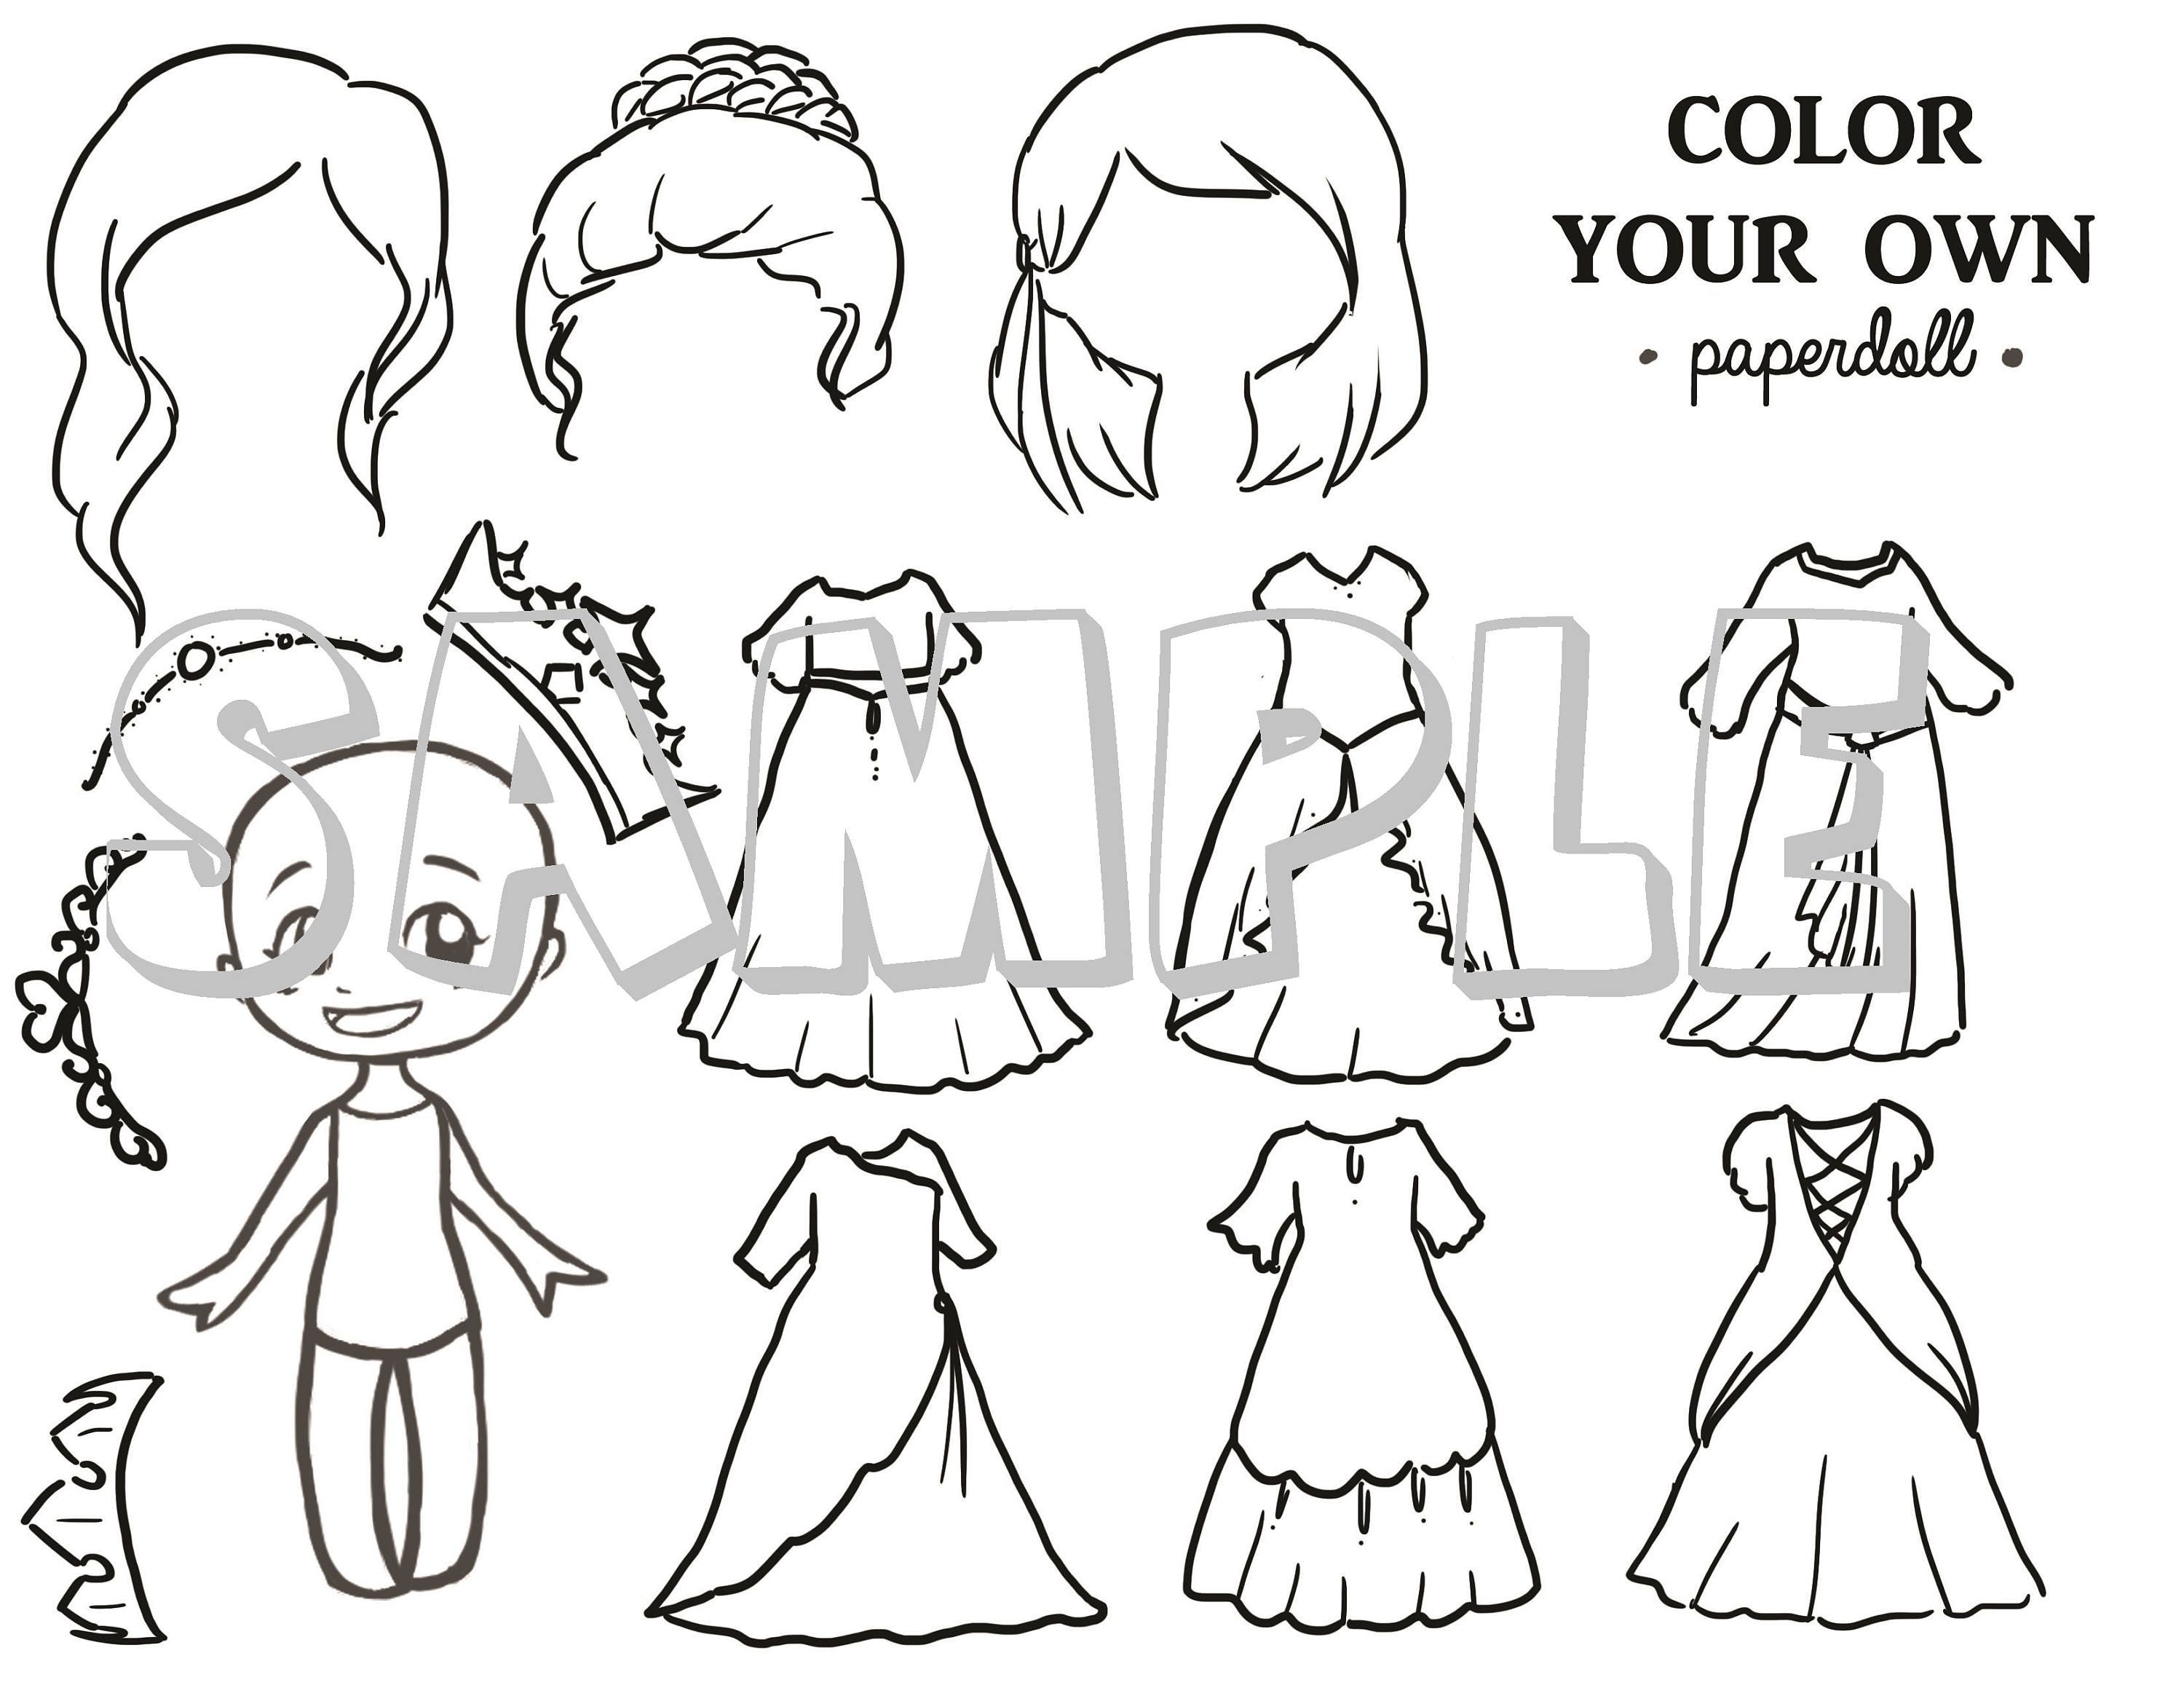 Digital file color your own princess paper doll